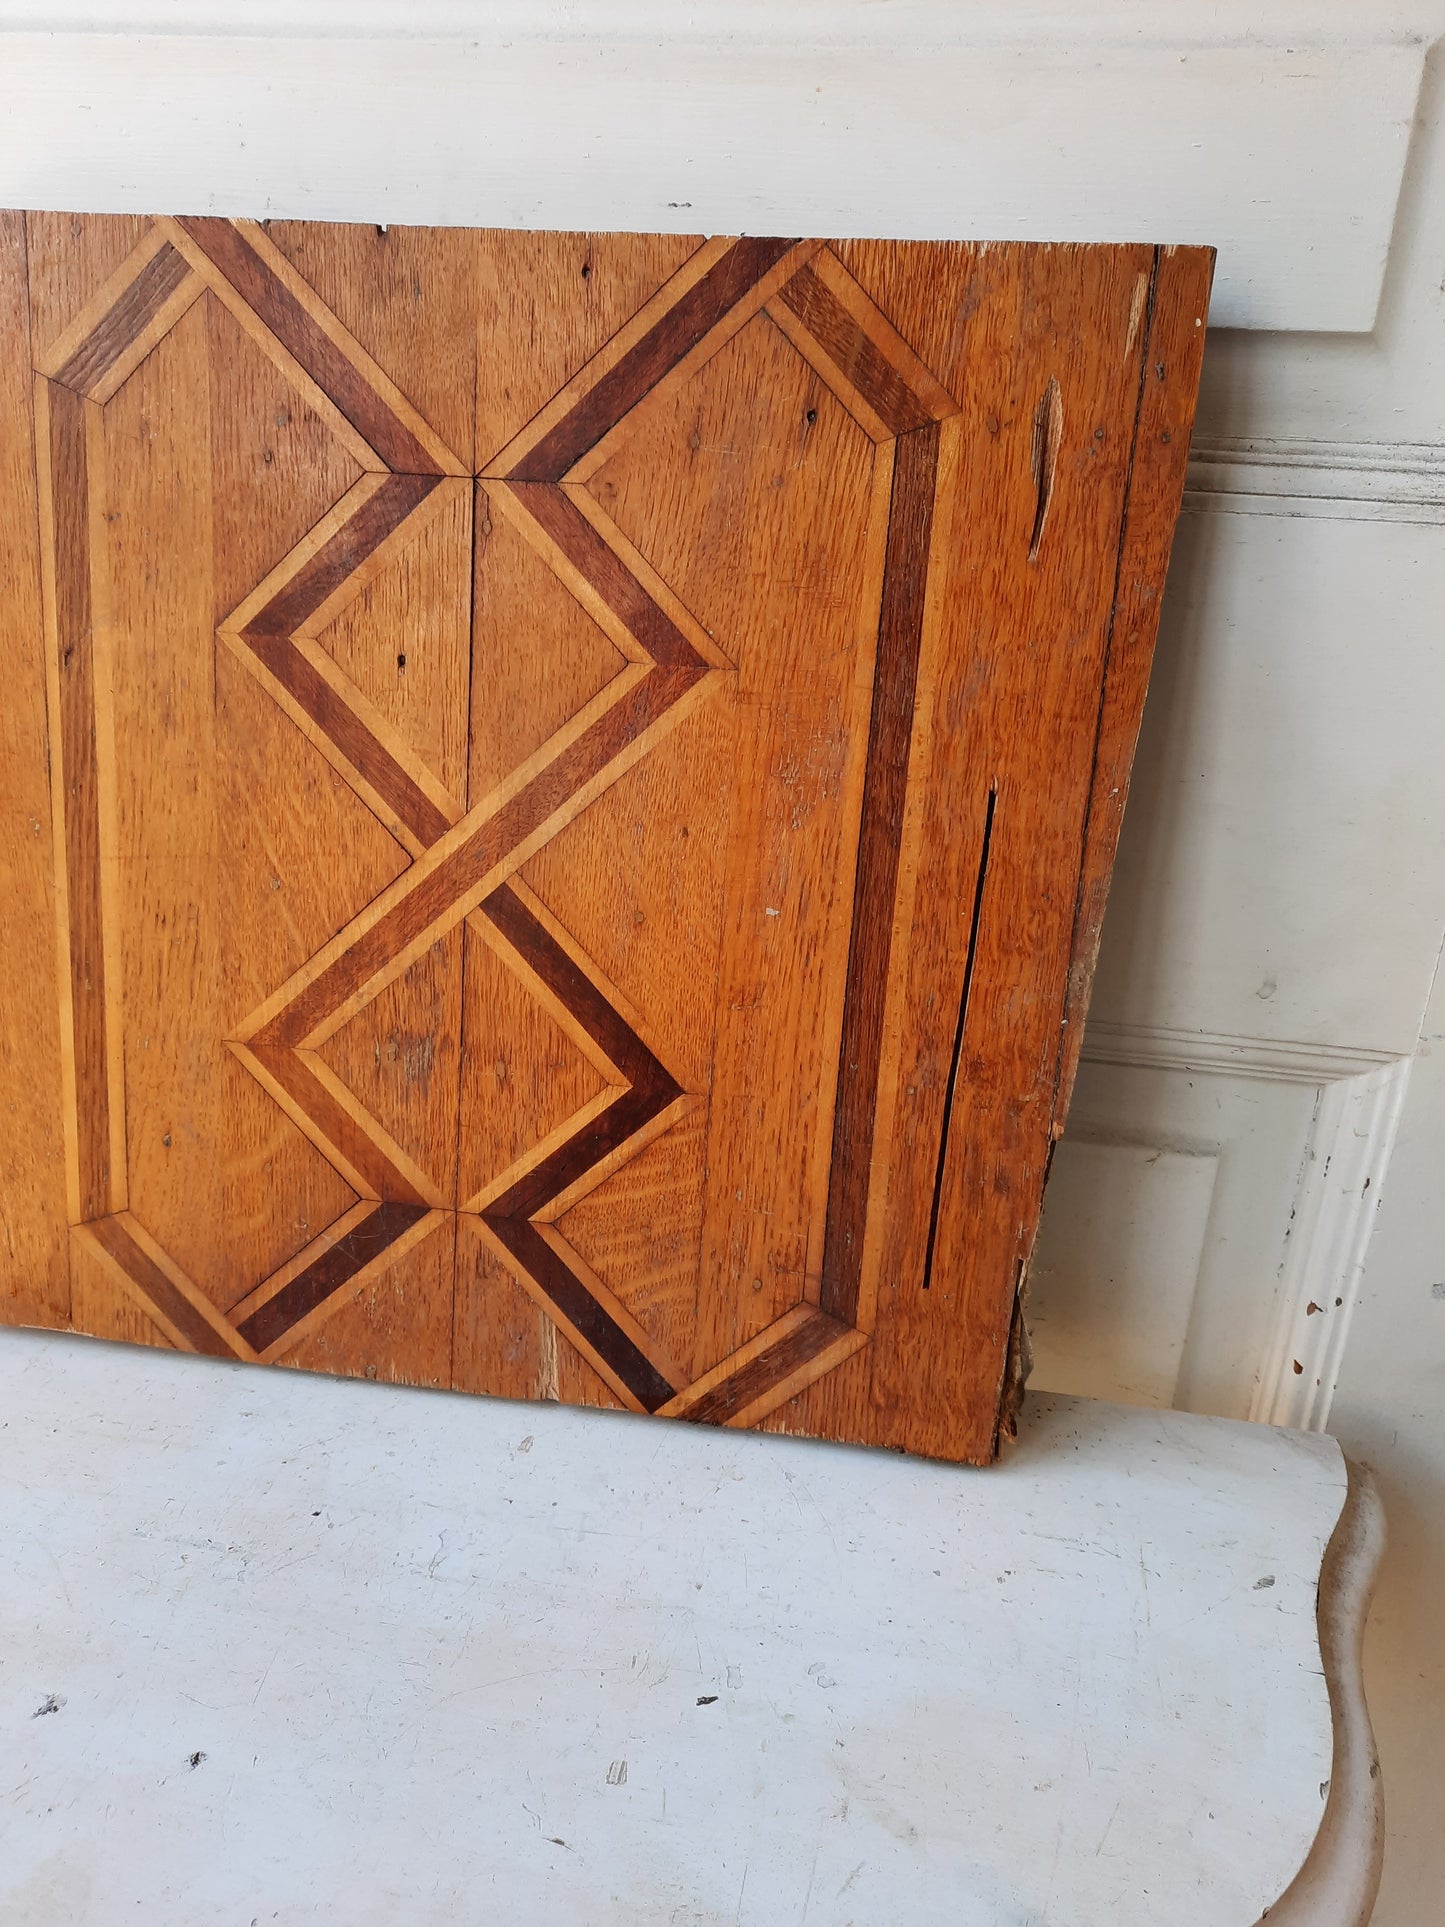 Antique Inlaid Flooring Section, Reclaimed Wood Floor Mosaic Piece